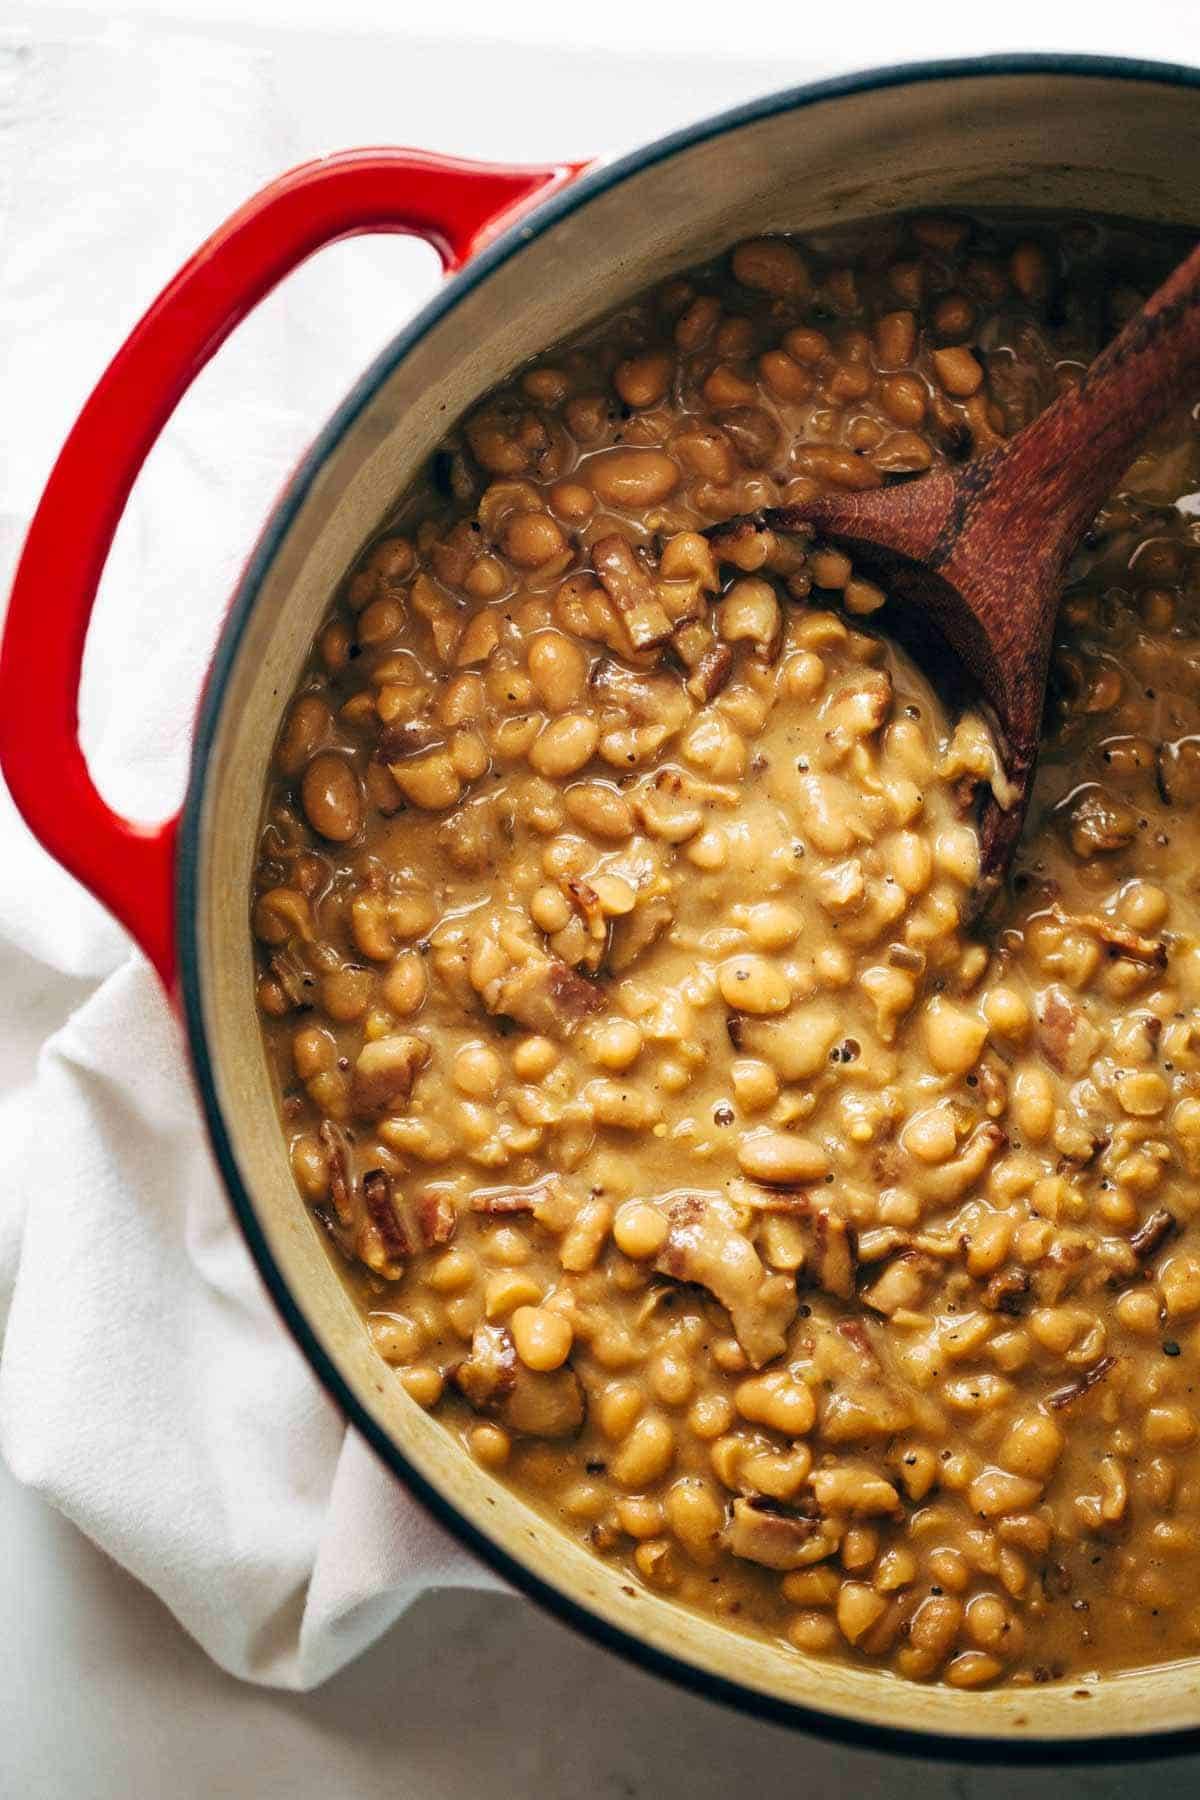 Homemade Brown Sugar Baked Beans! They are saucy, semi-creamy, brown sugar sweet + smoky bacon salty, and deliciously comforting. Five basic ingredients! | pinchofyum.com